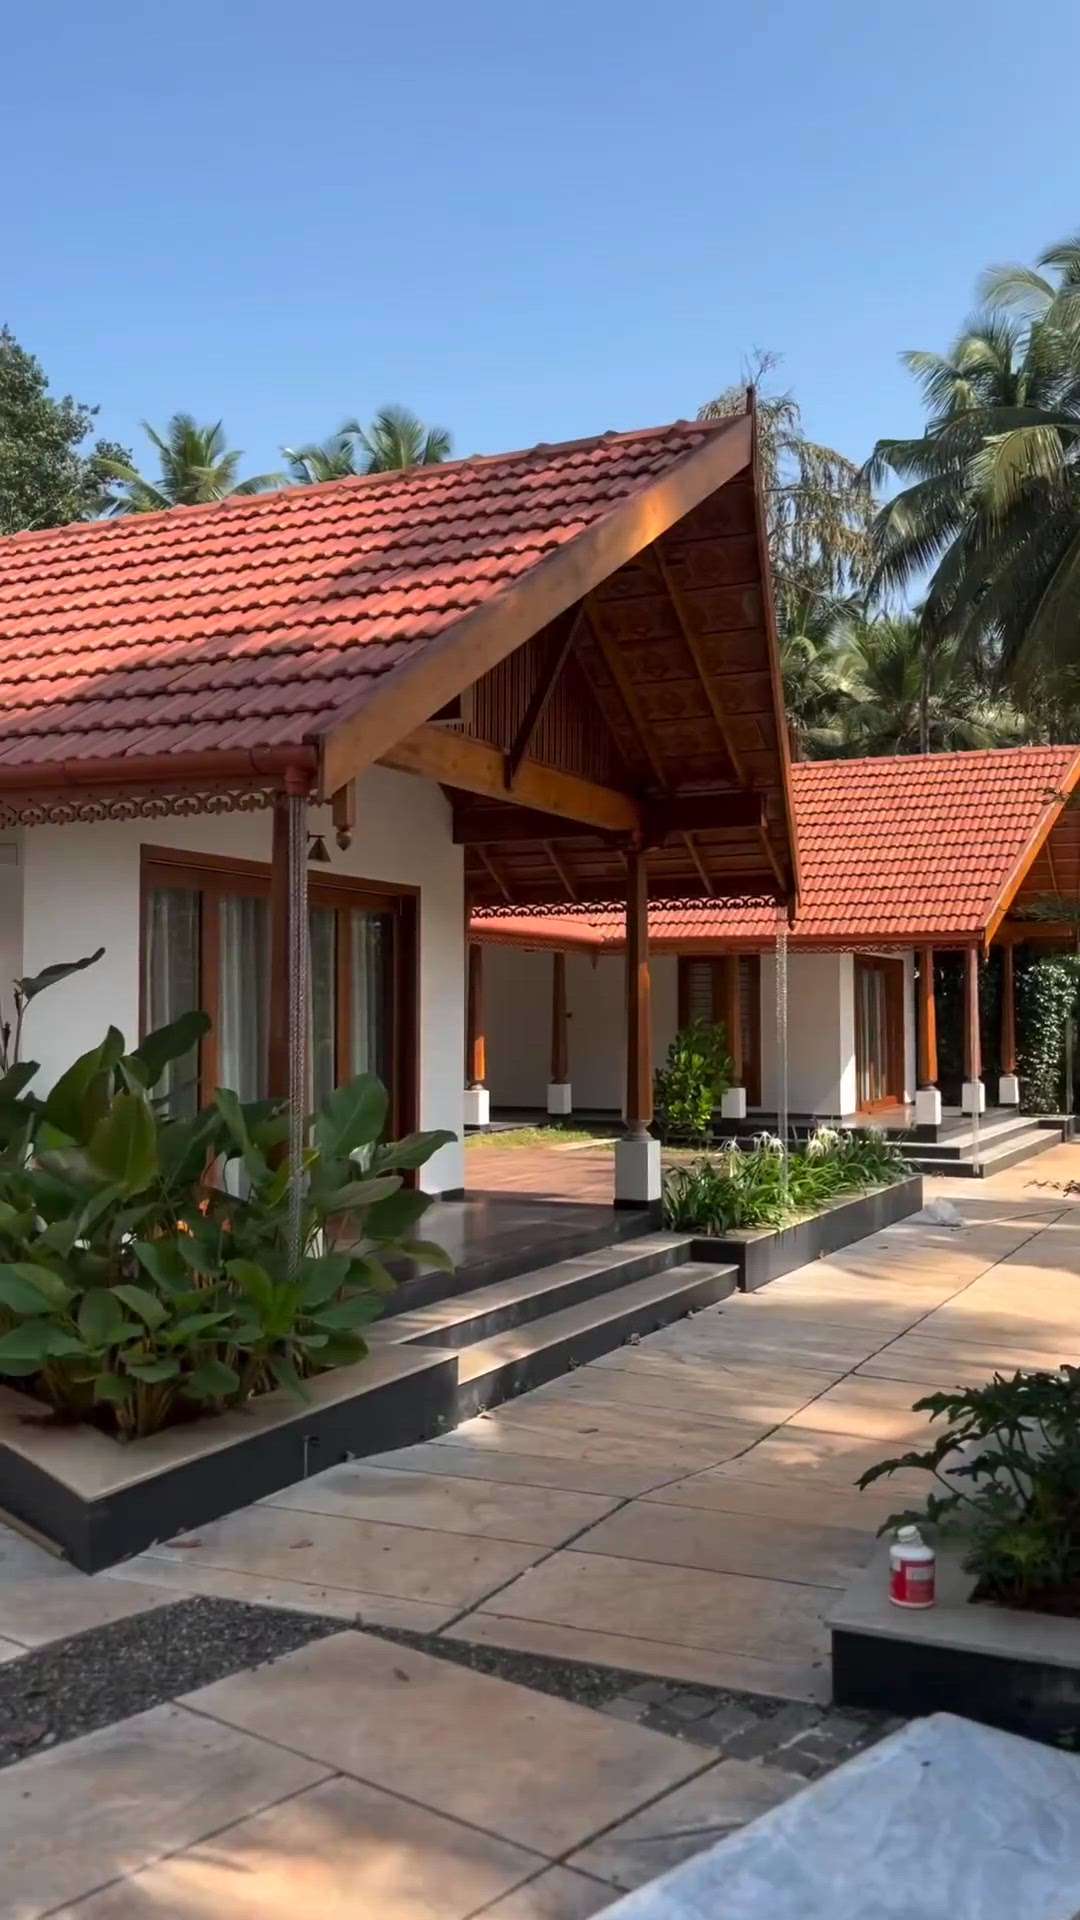 HOME 🏡

PROJECT DETAILS
Client Name: ABDUL NAZAR
Location: Kottakadavu, FEROKE
Plot Area: 1.75 acres
Total sqft: 4000 sq ft

Architecture and Design Firm: BCA Architecture Constructions and Consultants: Steps designs Furniture: @cubicdesigns @shabeer_cubicdesigns

Kolo - India's Largest Home Construction Community

To publish your work content on Kolo's official social media platforms (Instagram, Youtube, and Facebook), please contact Sannya N. at sannya@koloapp.in or 9895780610.

#residence #house #home #tropicalhouse #before&after #courtyard #staircase #home #keralahomes #budgethome #tropicalarchitecture #landscapedesign #insideoutside #spaces #instahomes #keralahomes #architecture #homedecor #interiordesign #house #indoorplants #greenhome #decor #artificialgrass